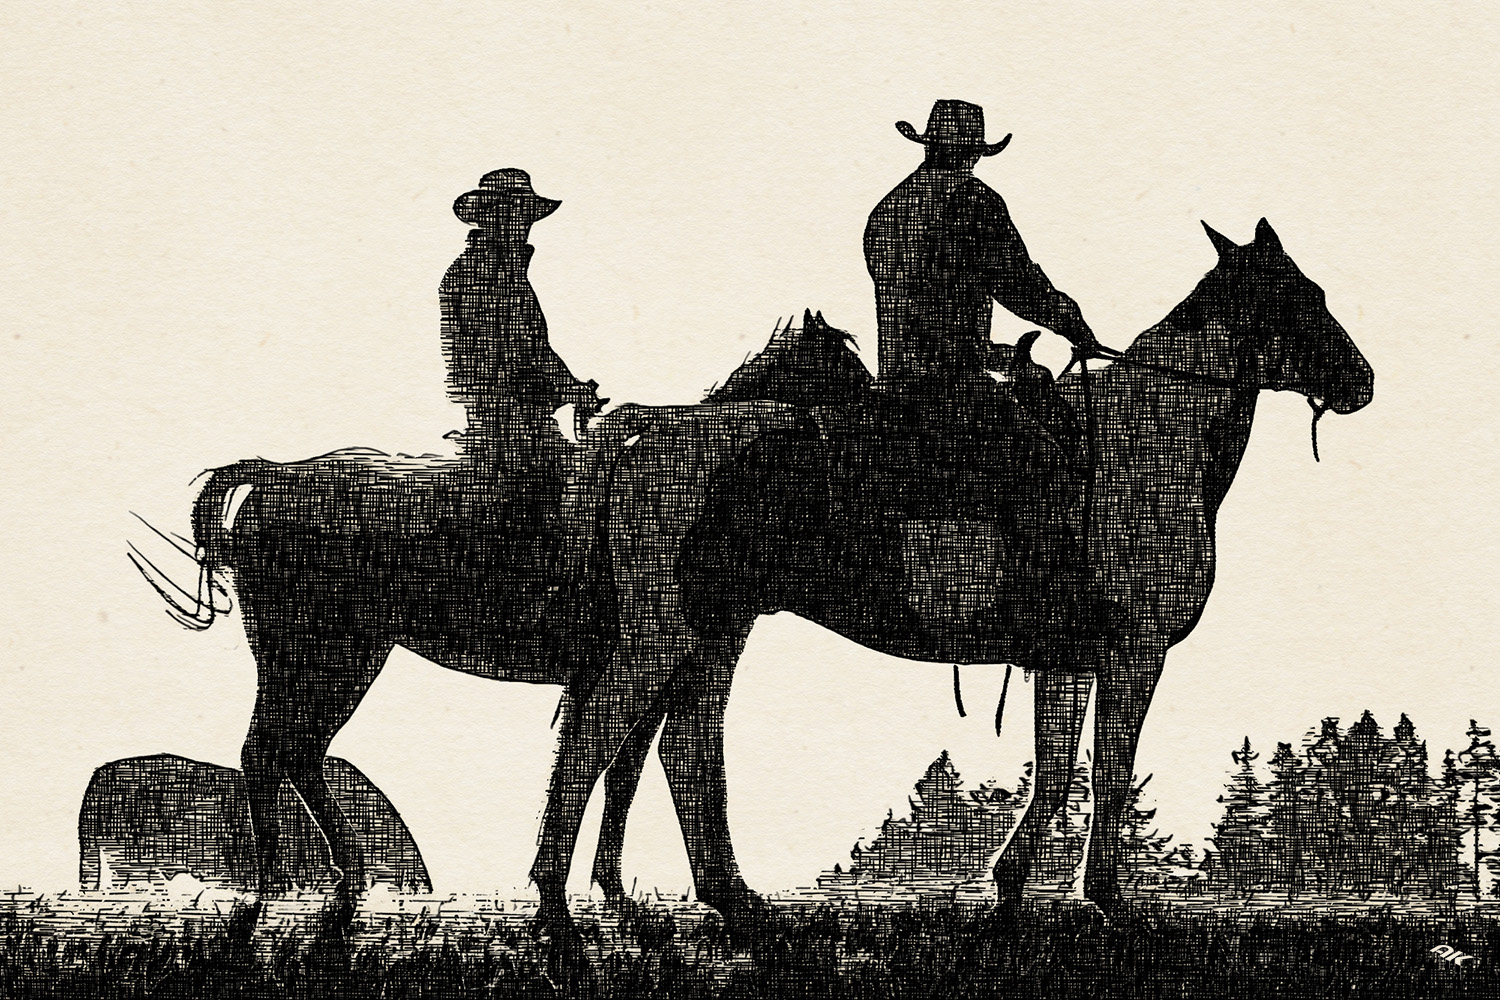 Two cowboys riding on horseback in a Prairie landscape at sunset.